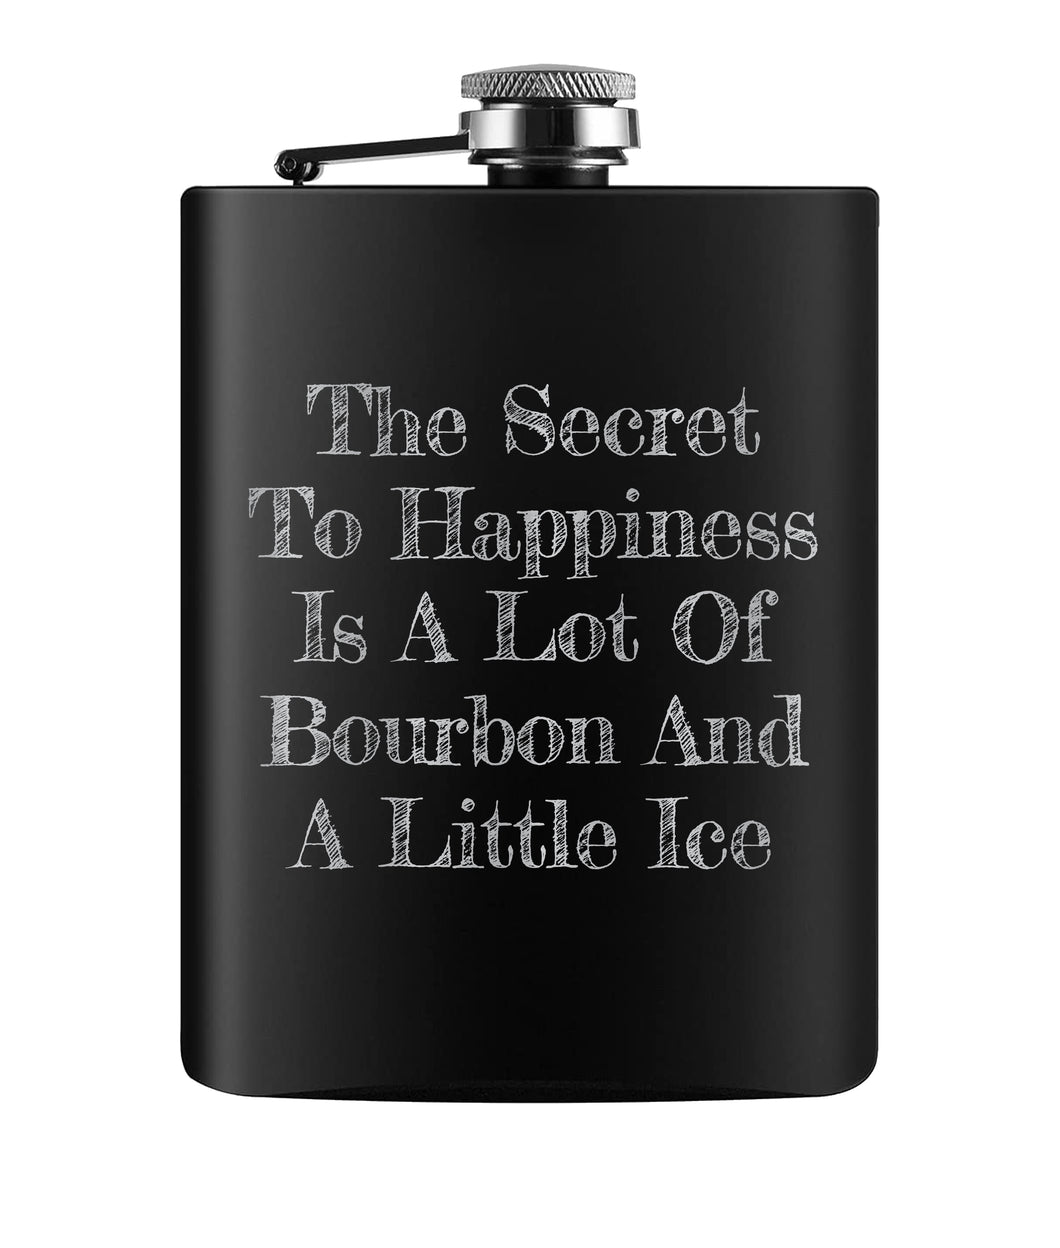 The Secret to Happiness is a Lot of Bourbon and a Little Ice Flask